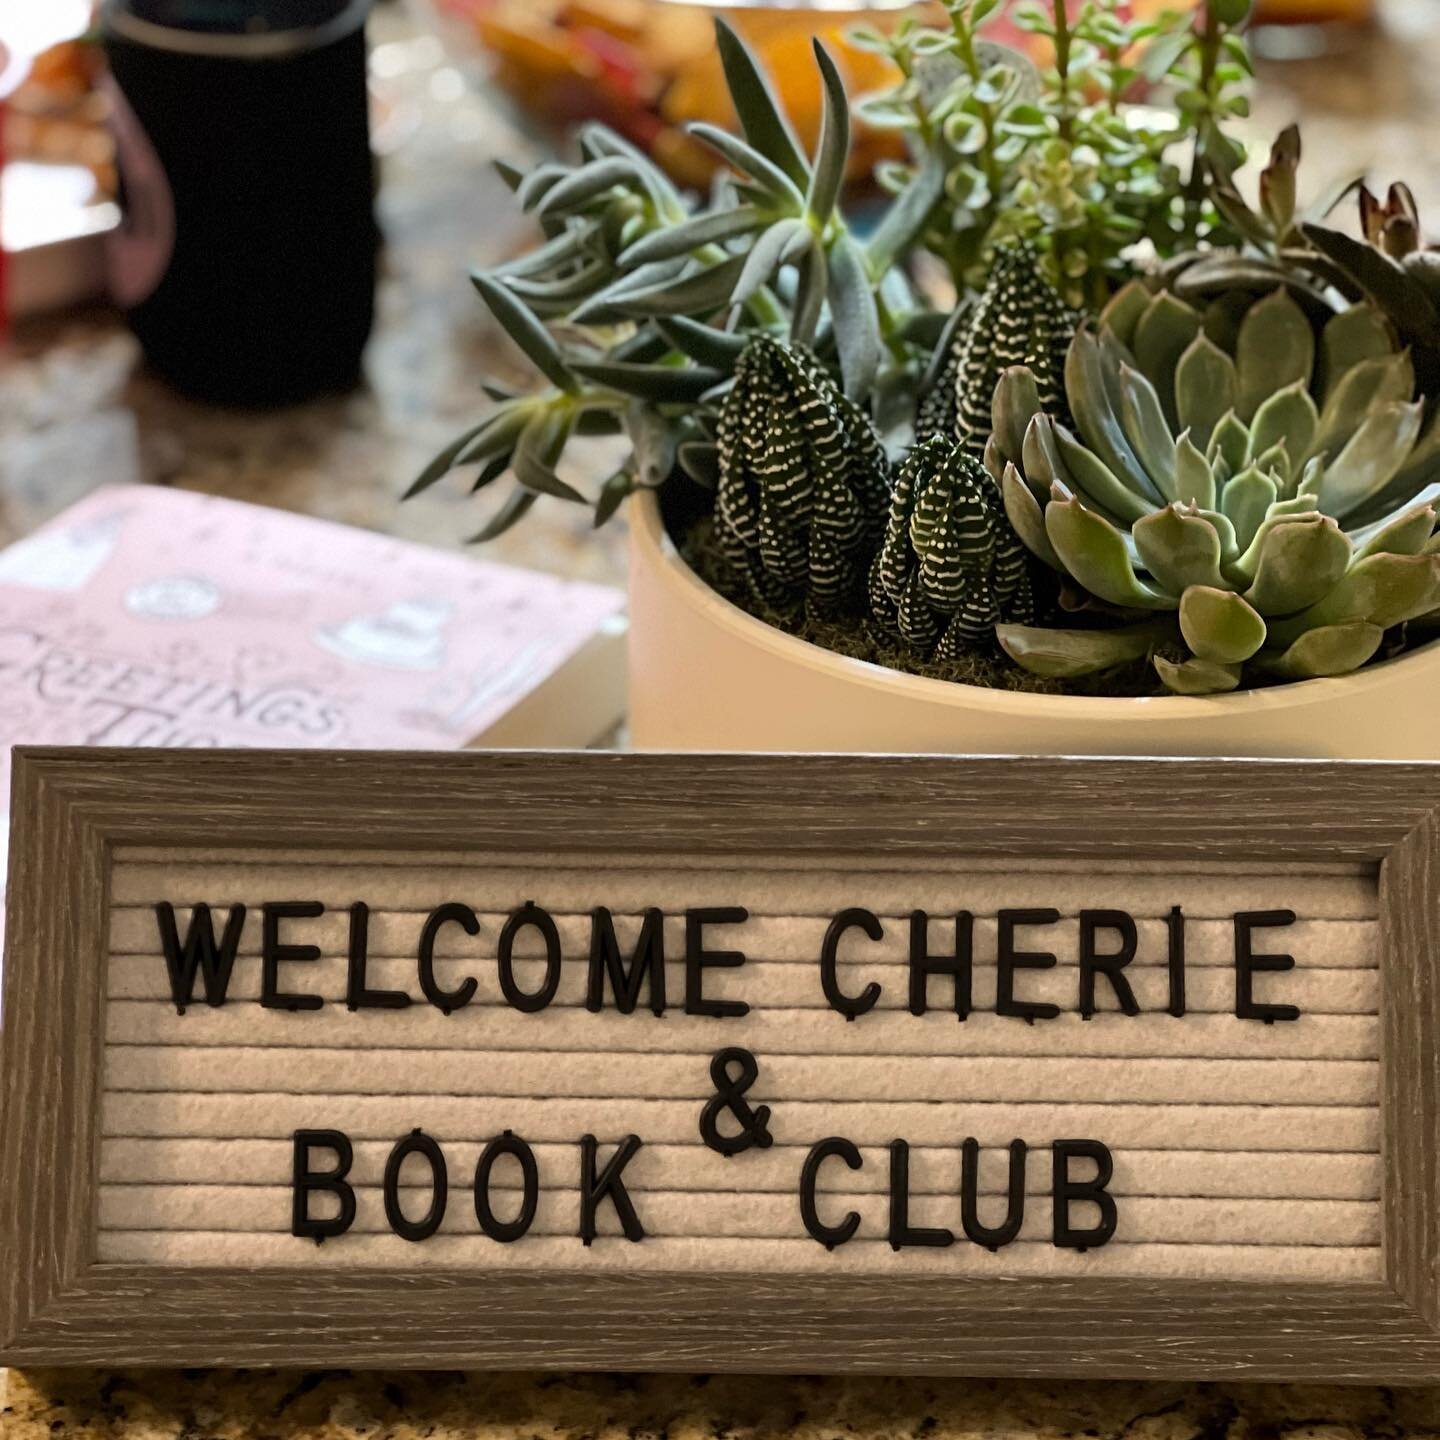 My longtime friend invited me to her #bookclub tonight to talk about their September book choice: #greetingsfromtucson 🌵it was such a great evening. Swipe to the end to see us at our 5th grade graduation!